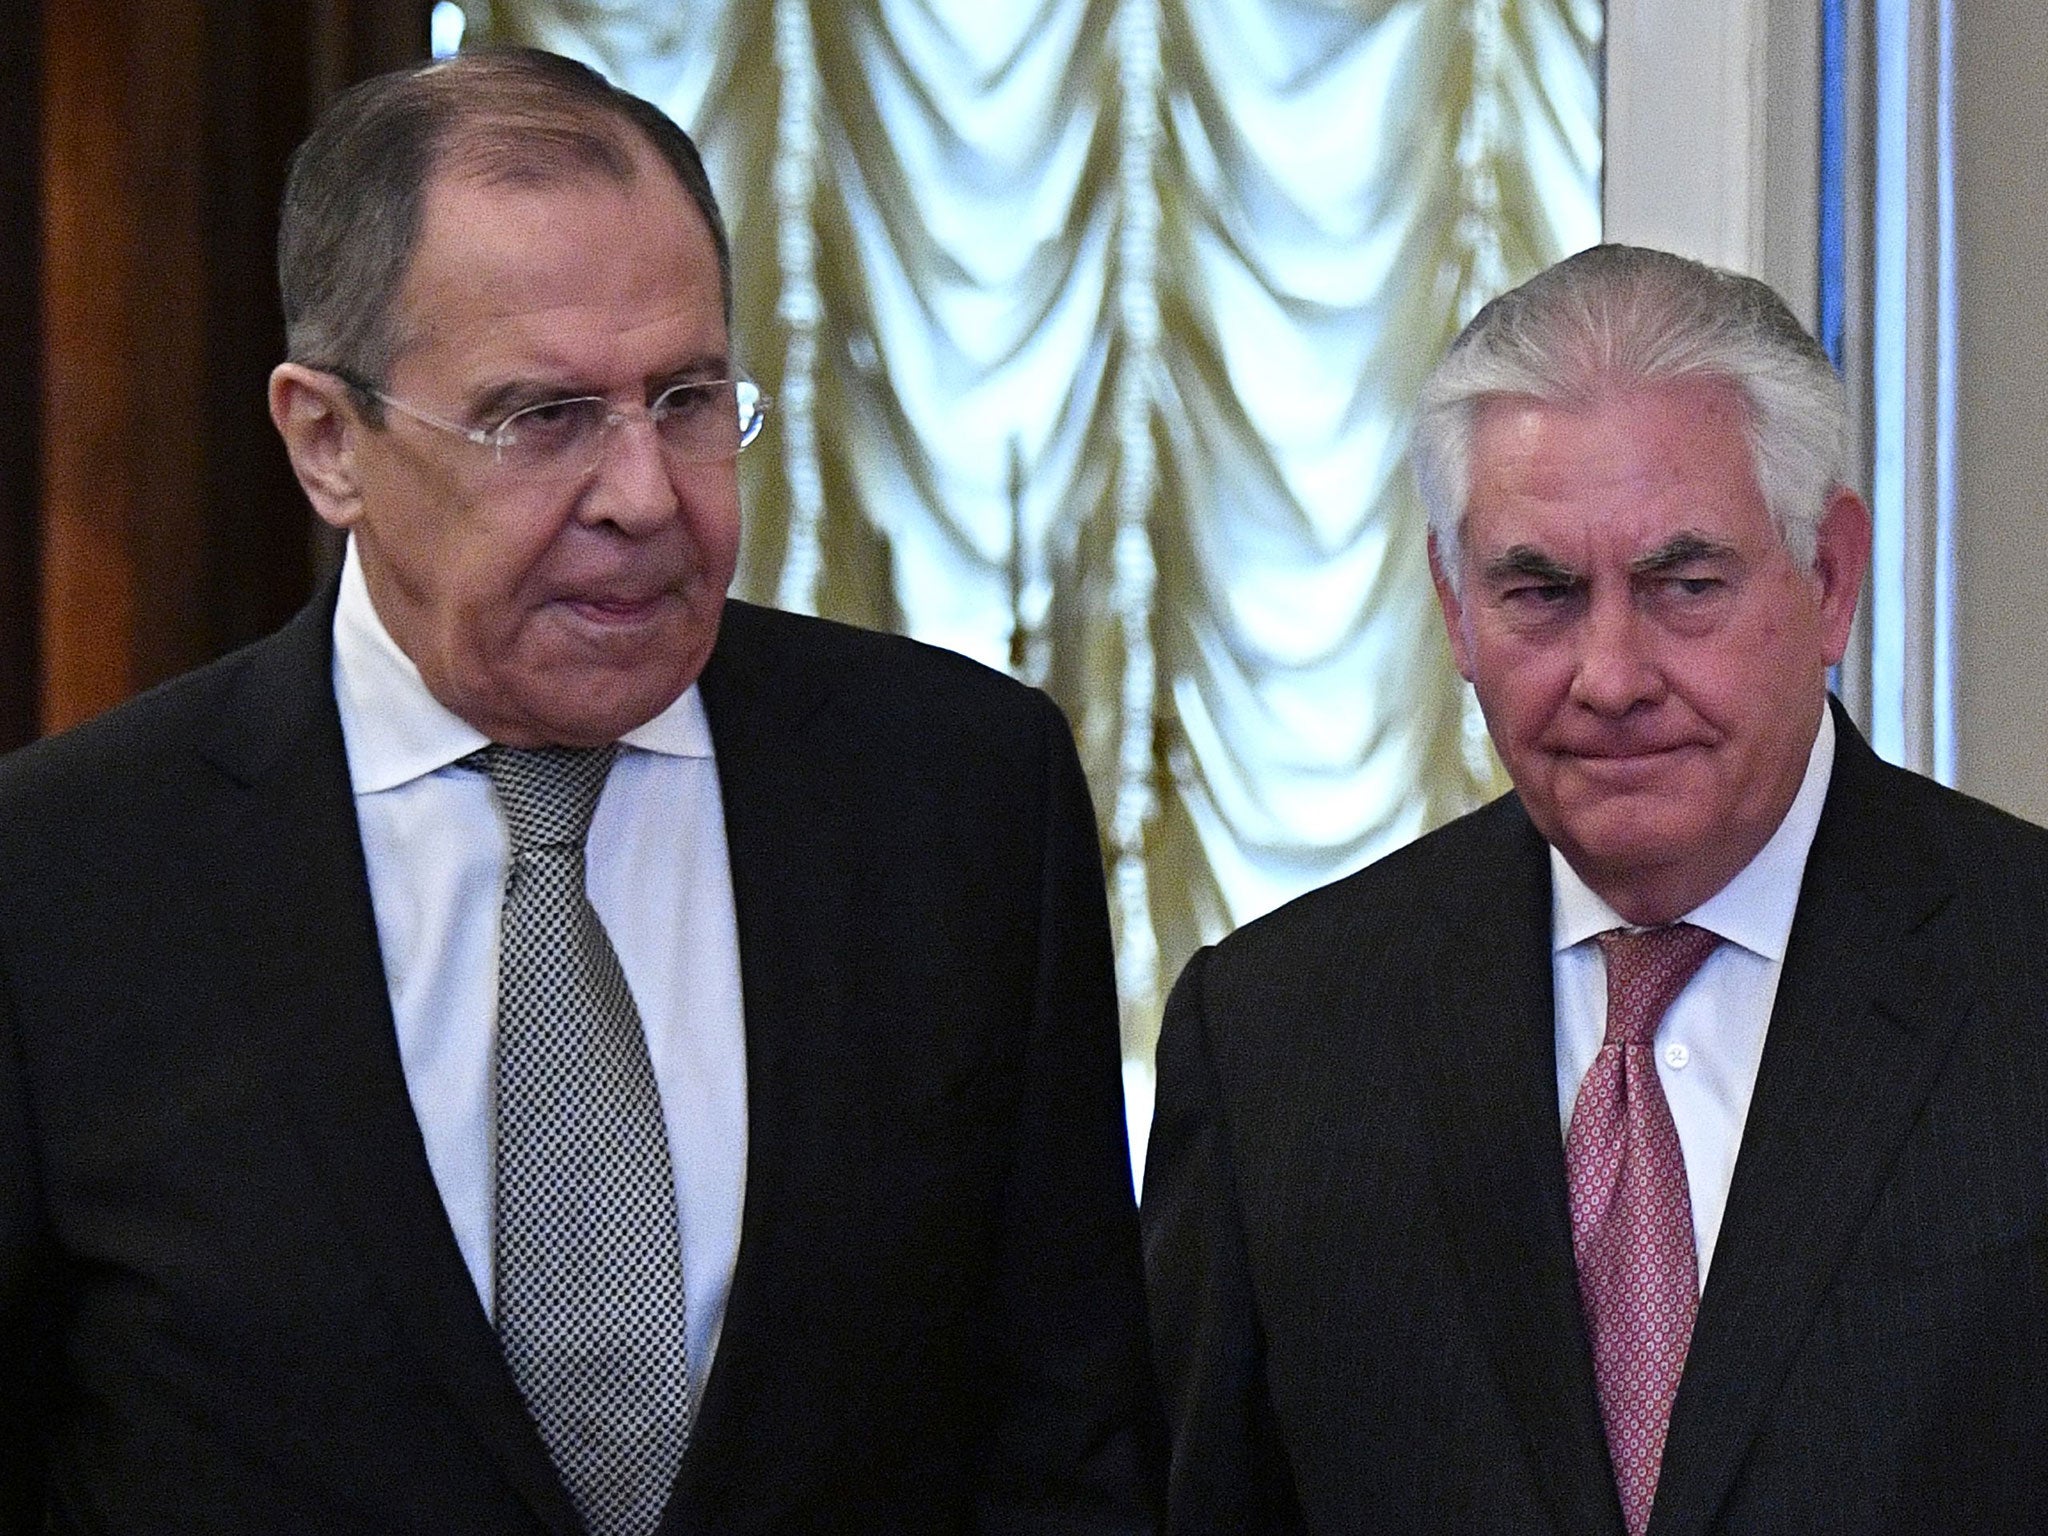 Russian Foreign Minister Sergei Lavrov, left, and US Secretary of State Rex Tillerson meet in Moscow